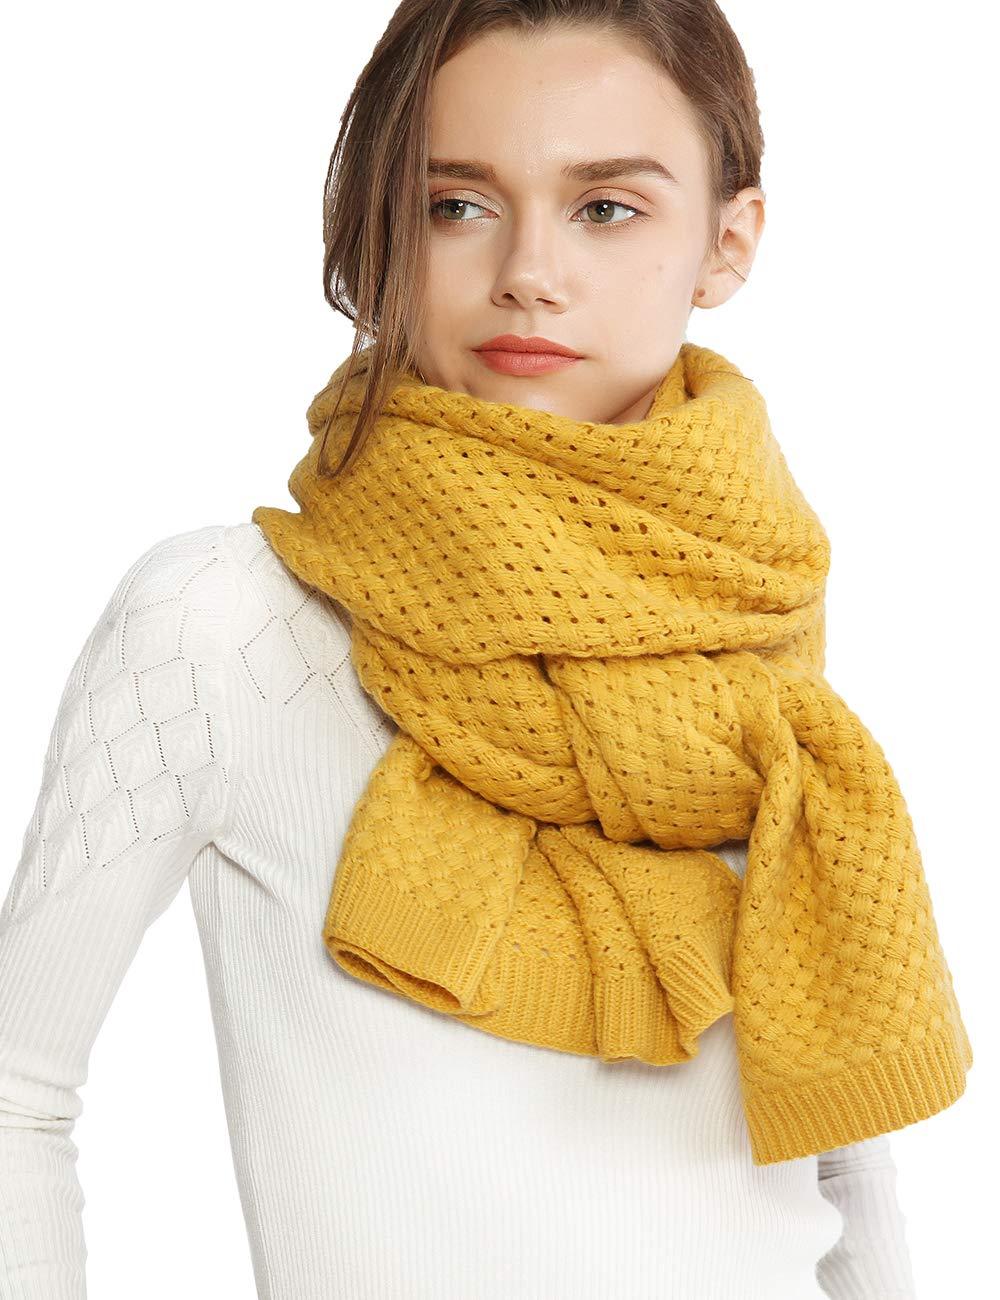 [Australia] - RIIQIICHY Chunky Knit Scarfs for Women Thick Cable Shawls Wrap Winter Soft Warm Long Large Solid Color Pashminas Stole Yellow 